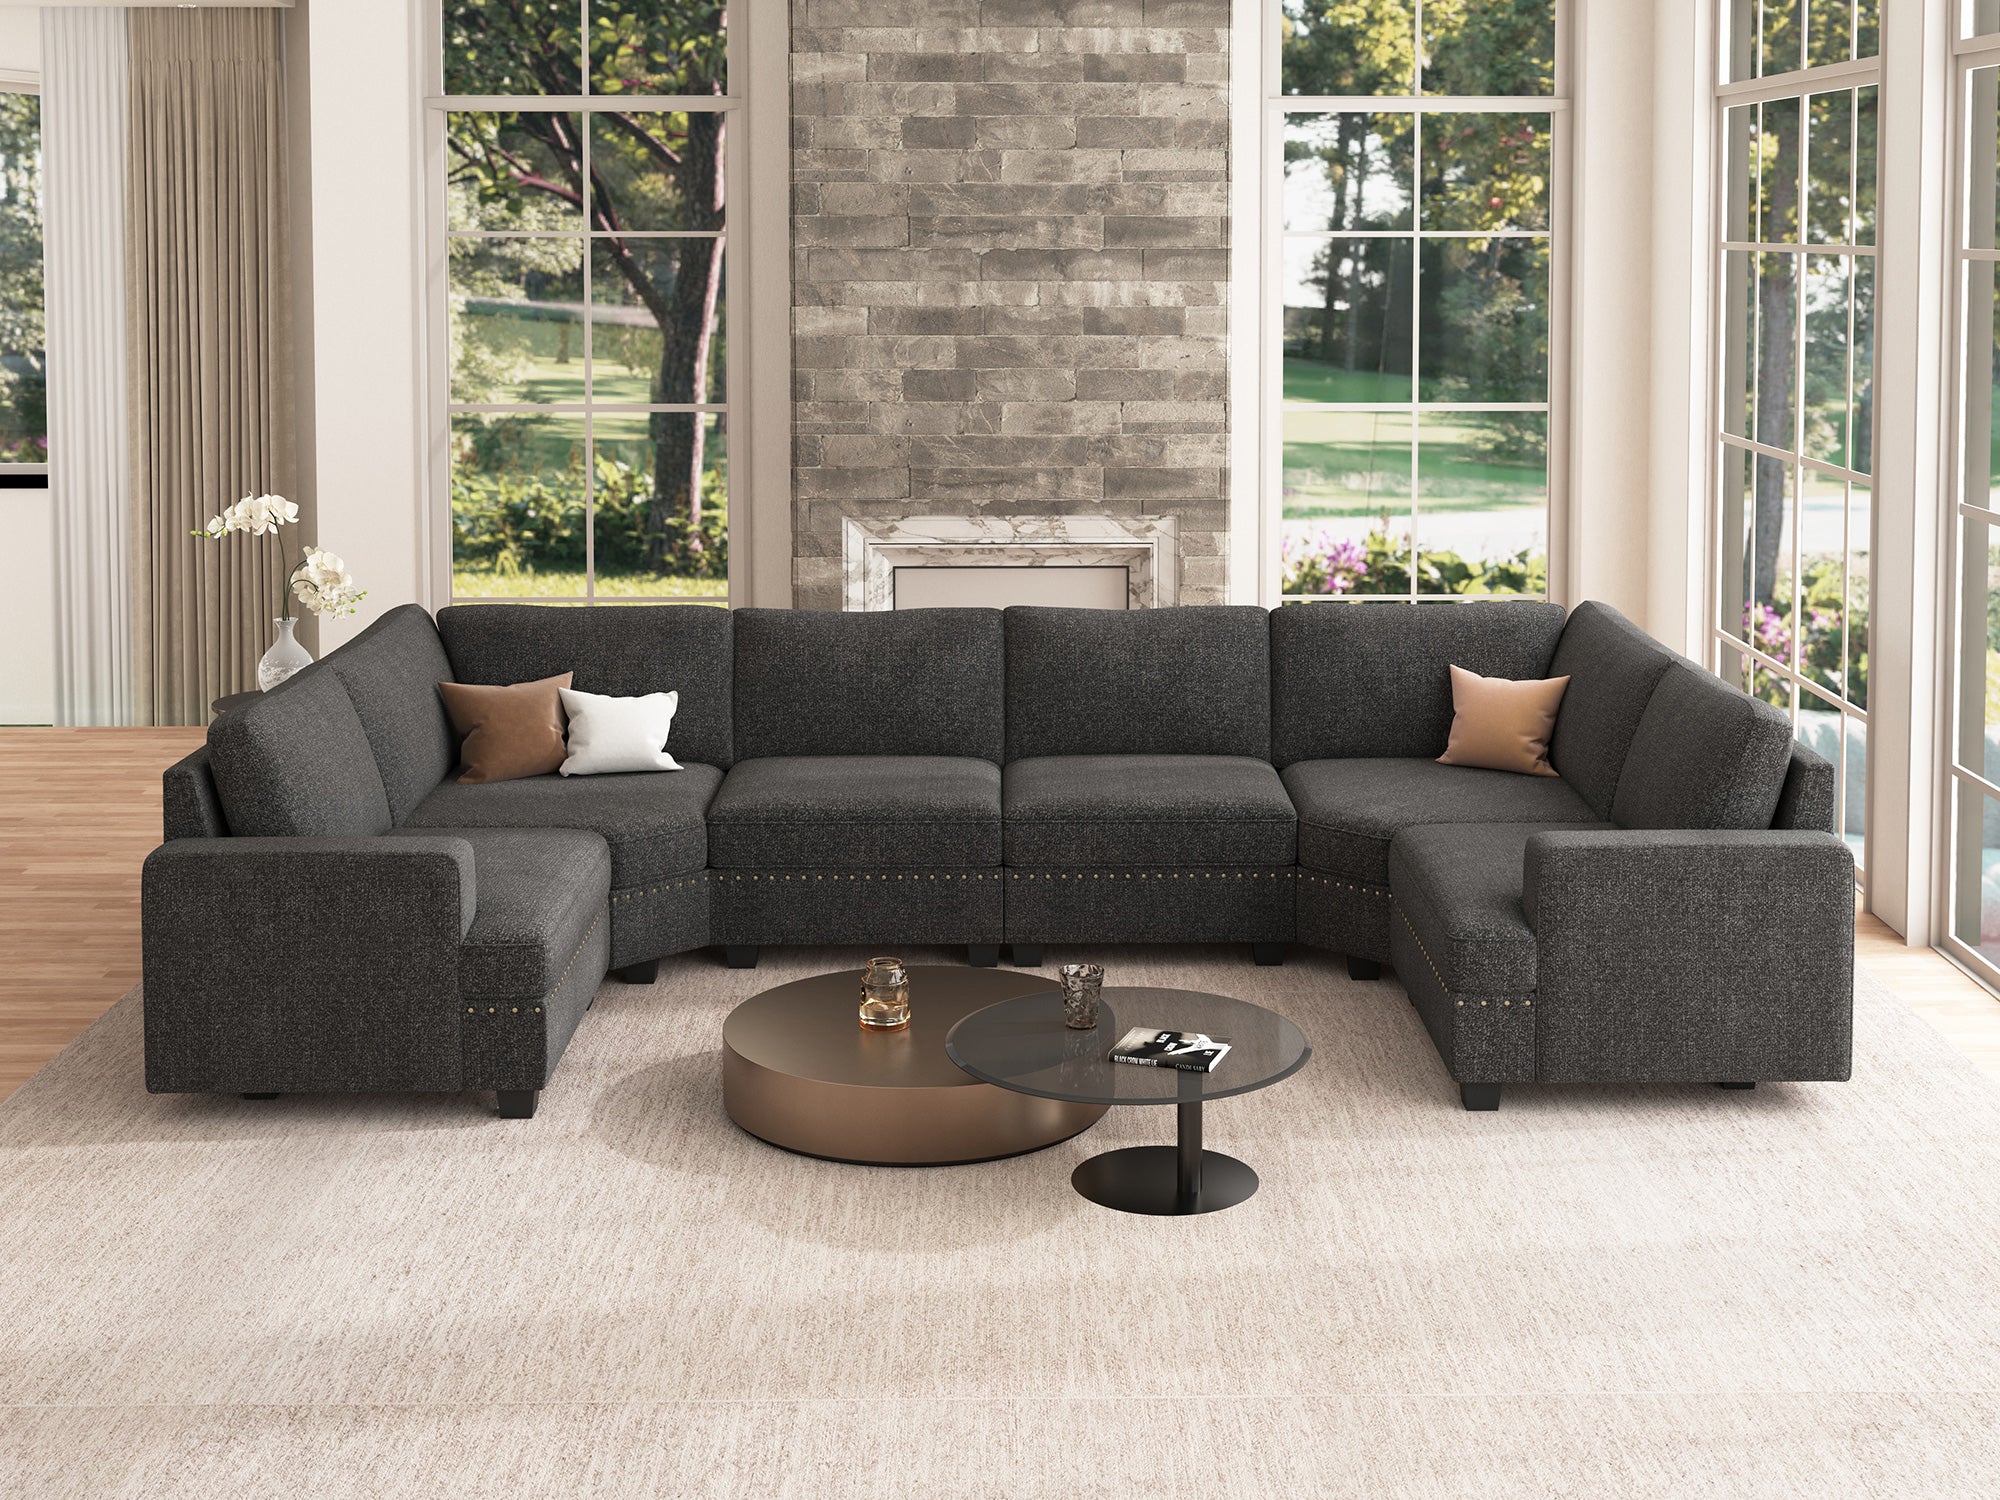 HONBAY 6-Seat U Shaped Corner Modular Sofa Oversized Sectional Sofa Couch for Living Room #Color_Dark Grey